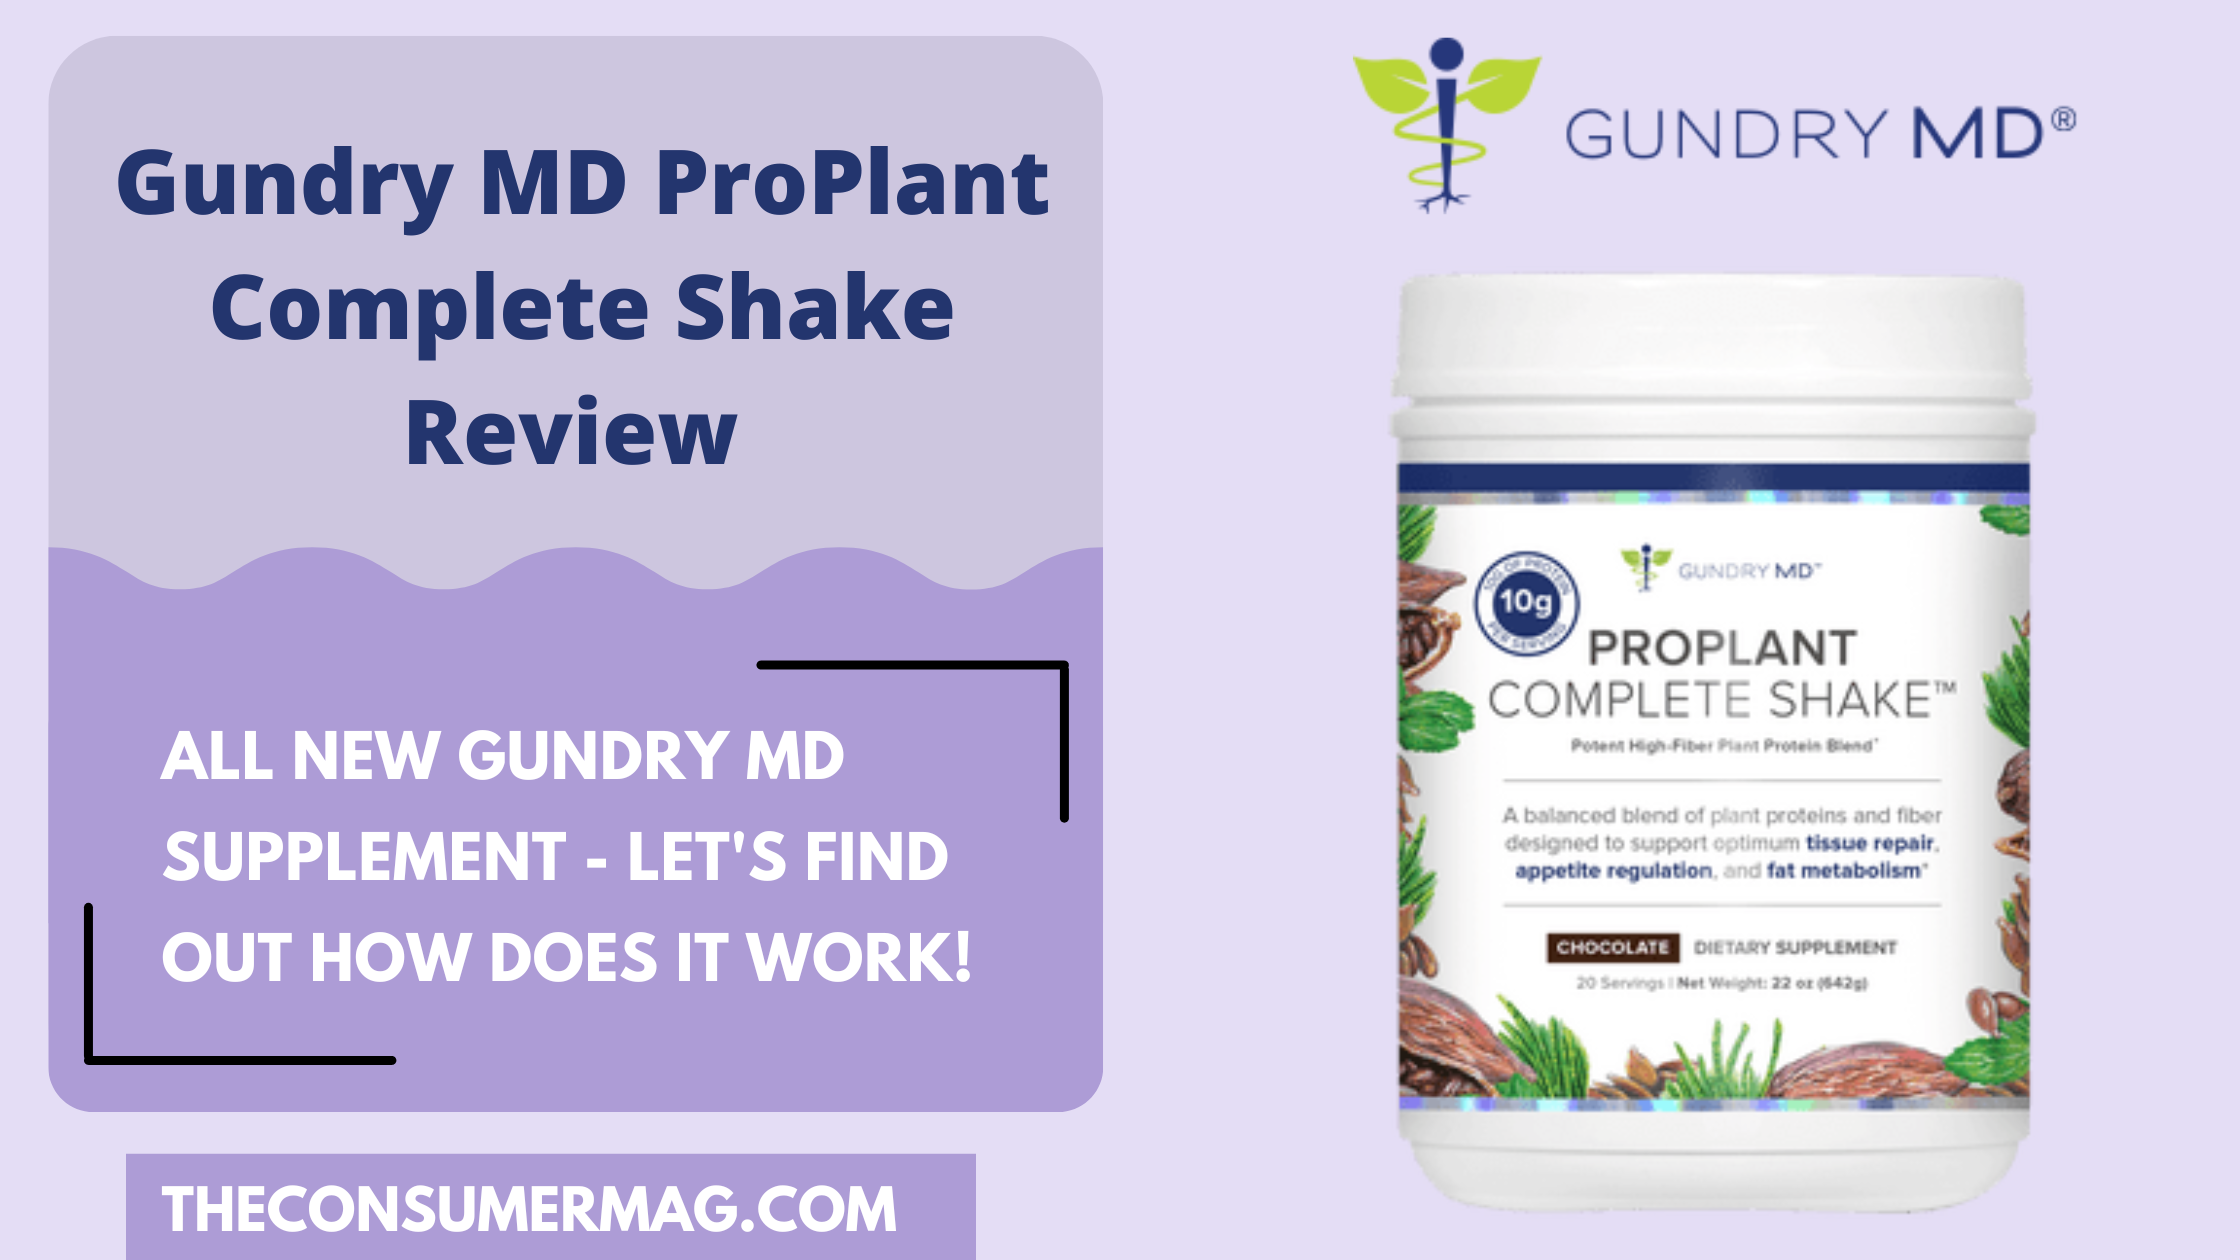 PROPLANT COMPLETE SHAKE featured image